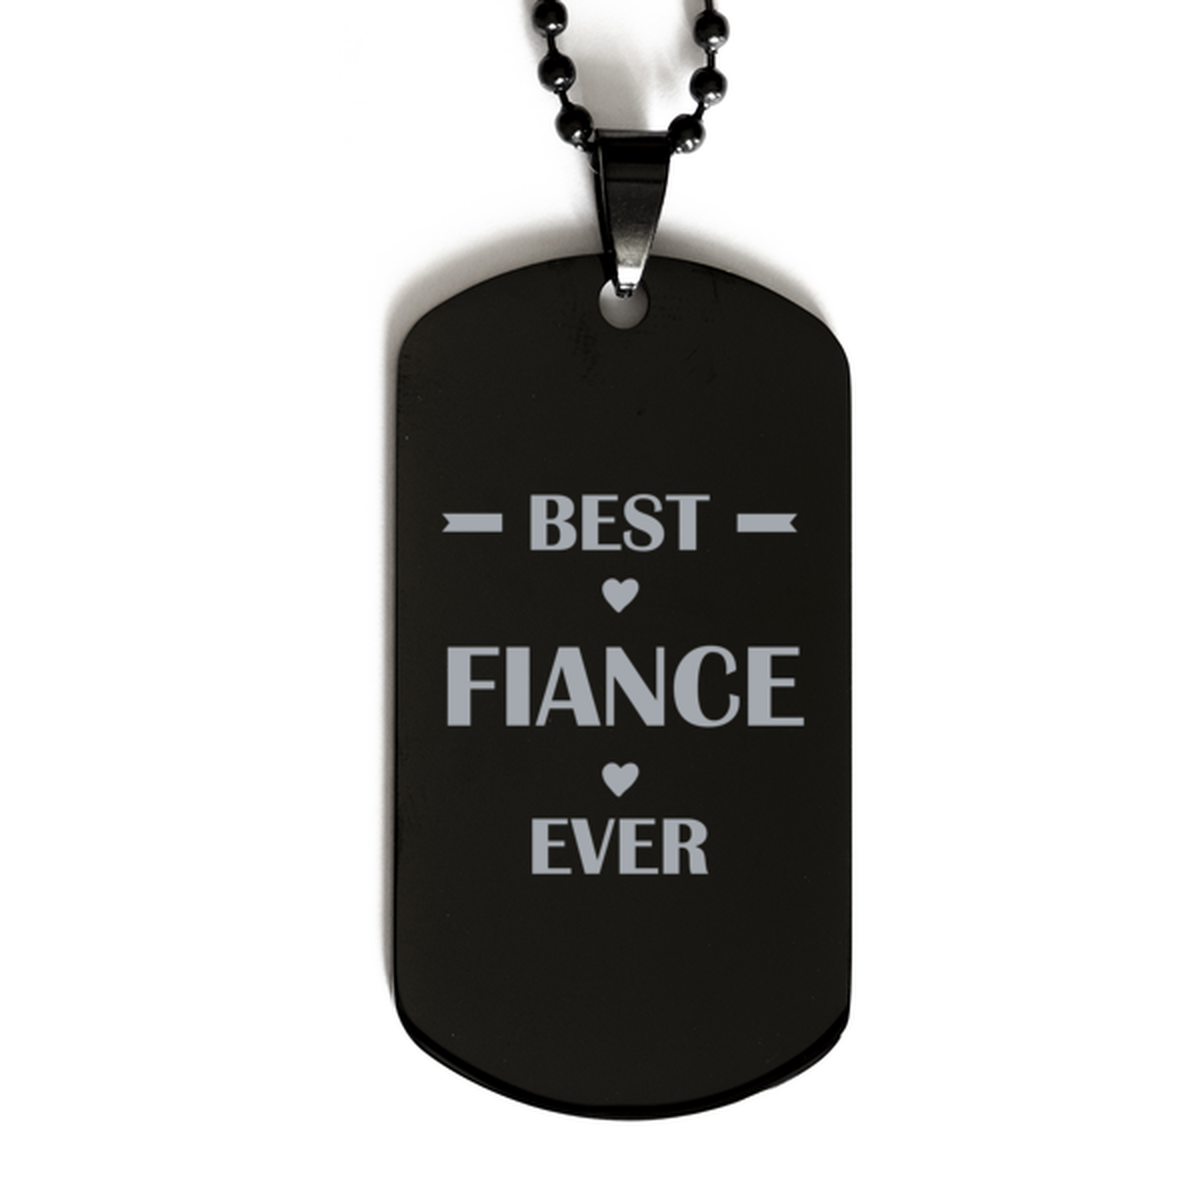 Best Fiance Ever Fiance Gifts, Funny Black Dog Tag For Fiance, Birthday Family Presents Engraved Necklace For Men